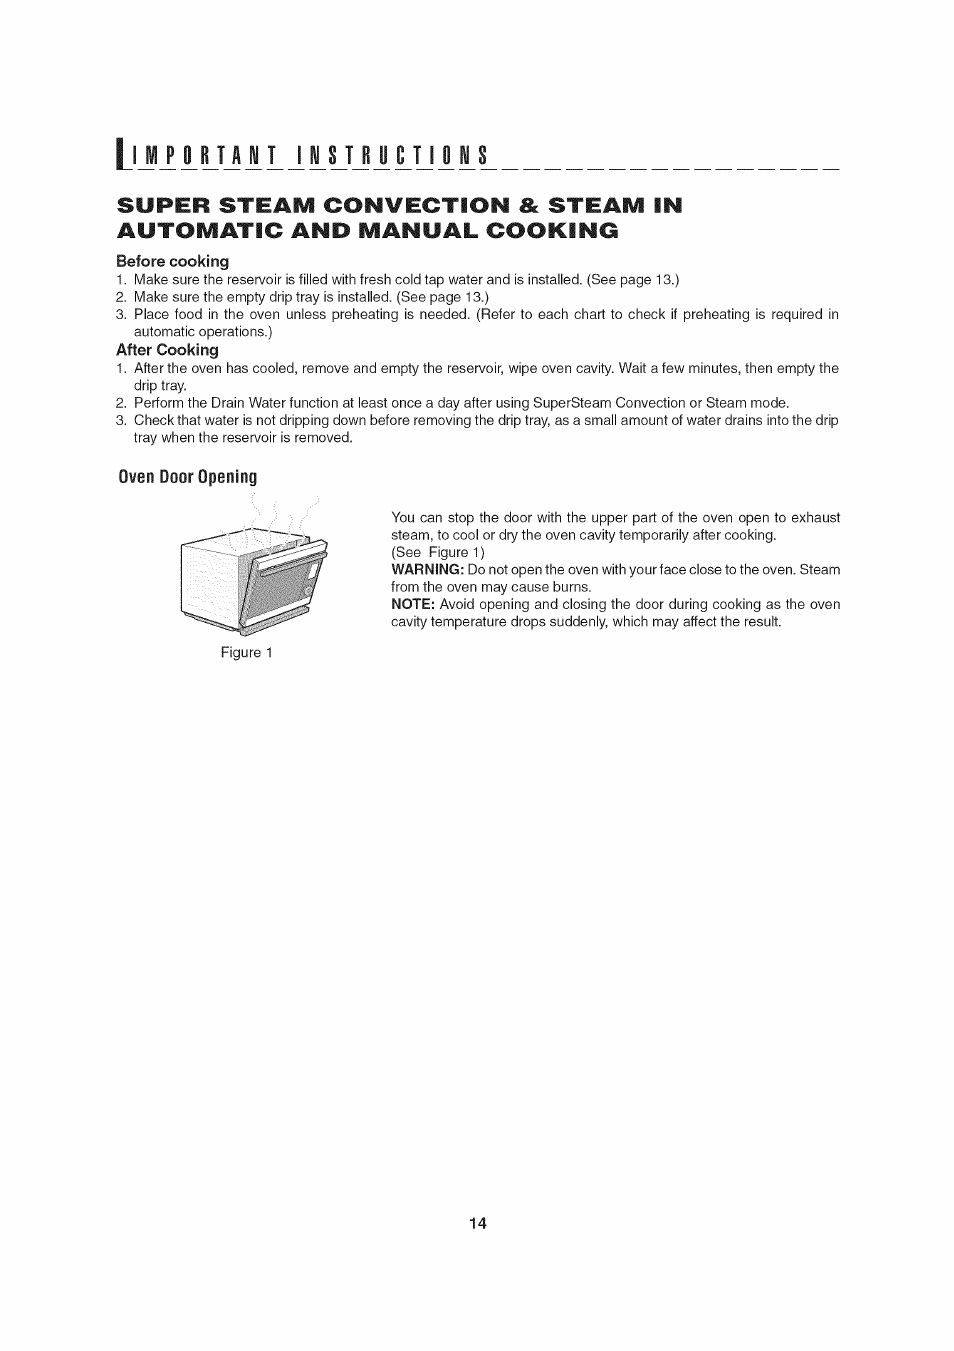 Before cooking, After cooking, Oven door opening | Sharp AX-1200 User Manual | Page 16 / 43